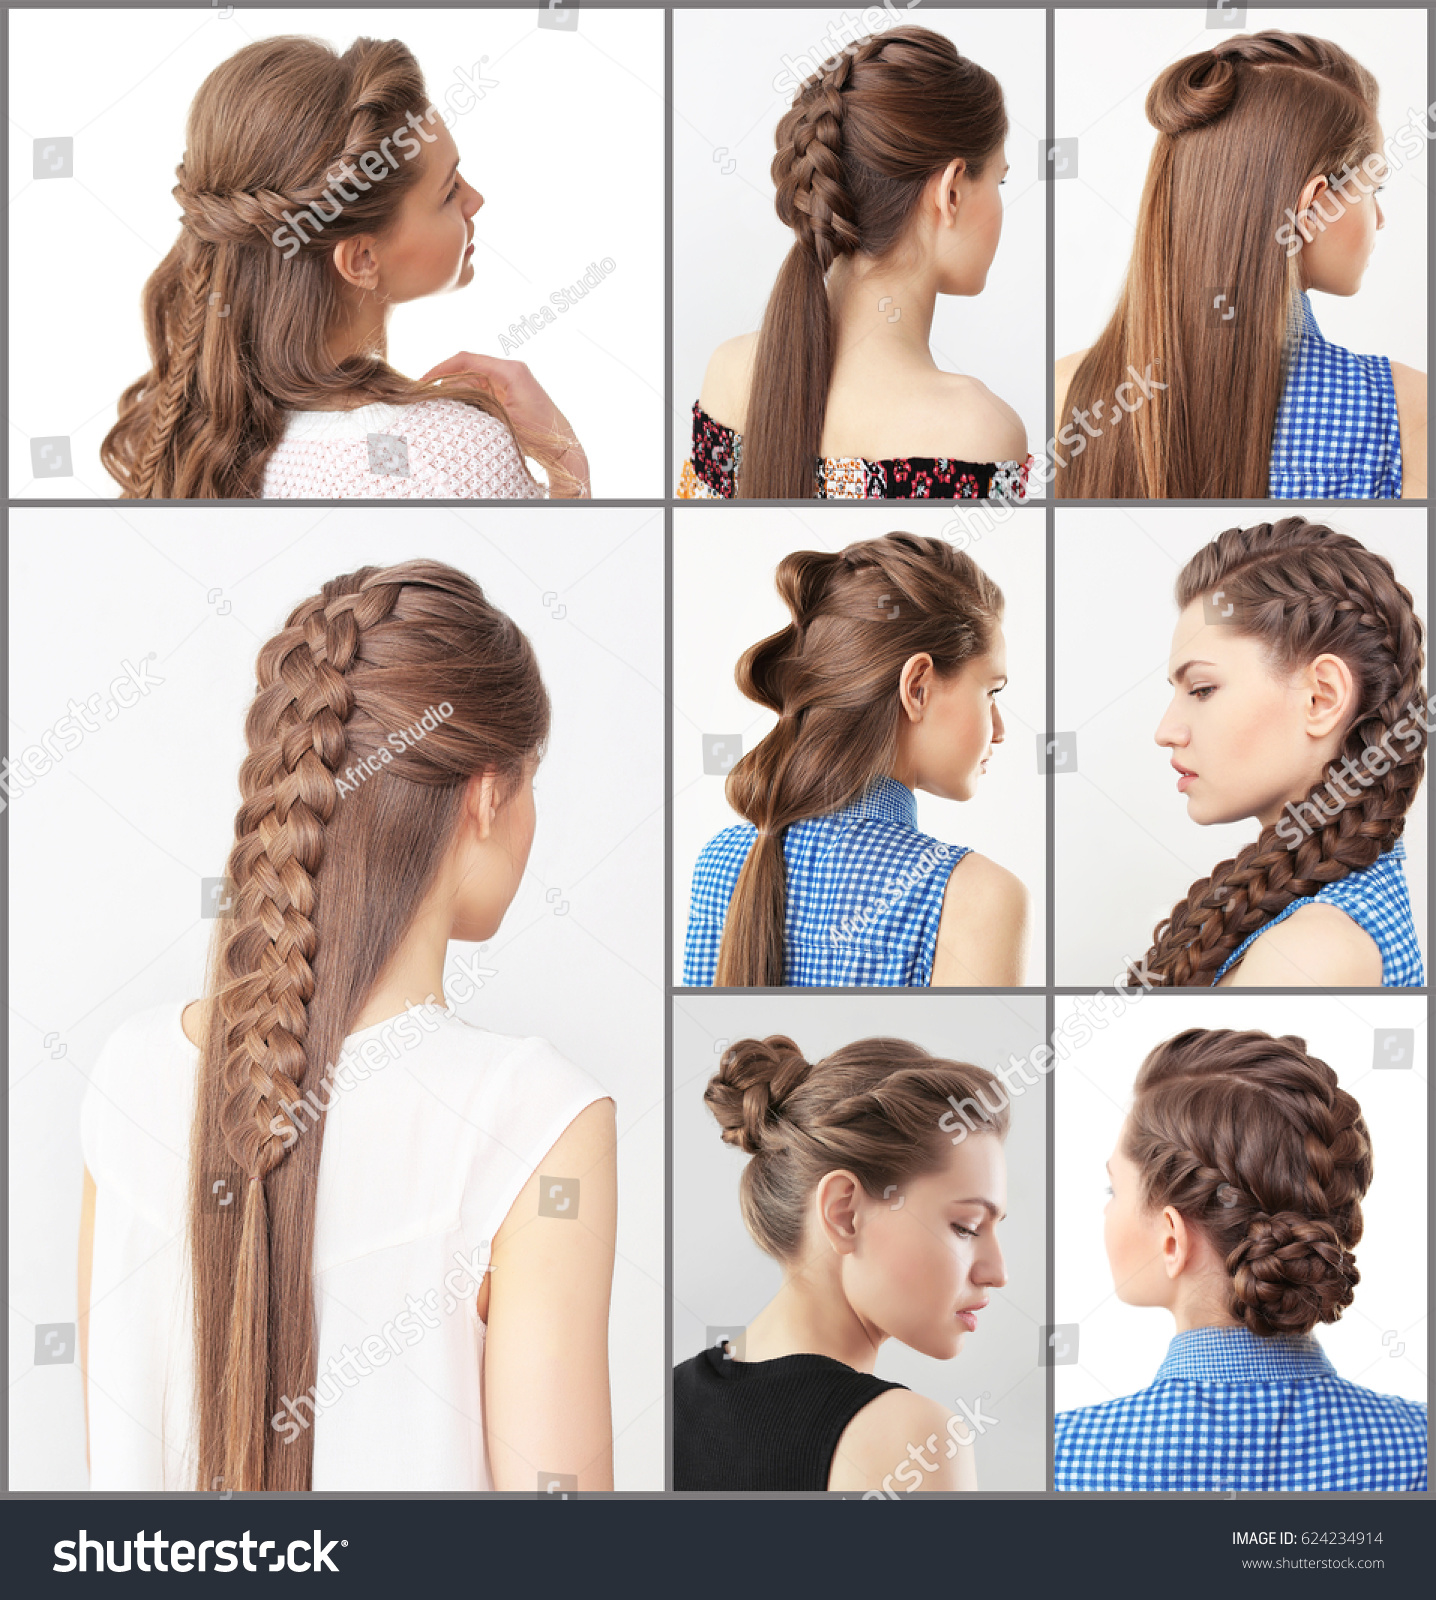 Woman Different Hairstyles Stock Photo Edit Now 624234914